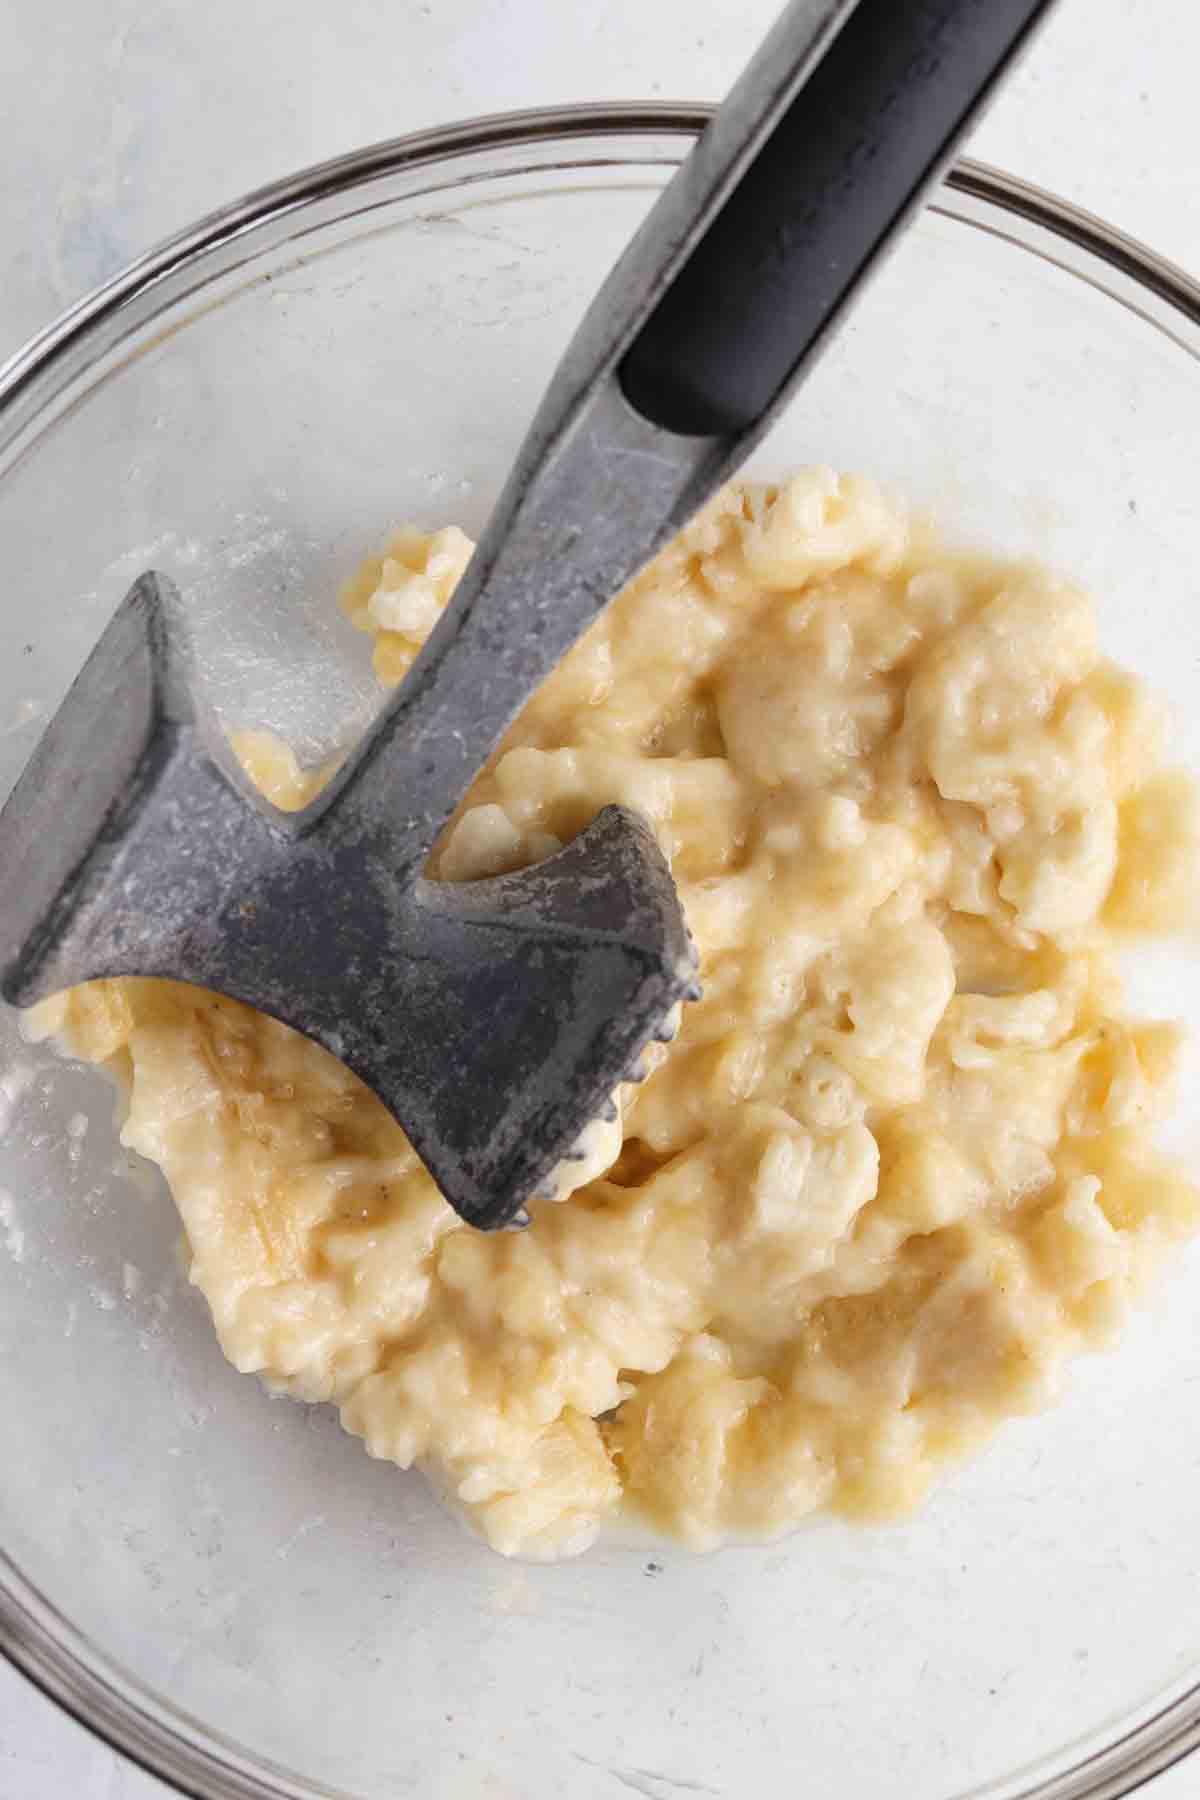 Mashed banana in a glass bowl with a potato masher.